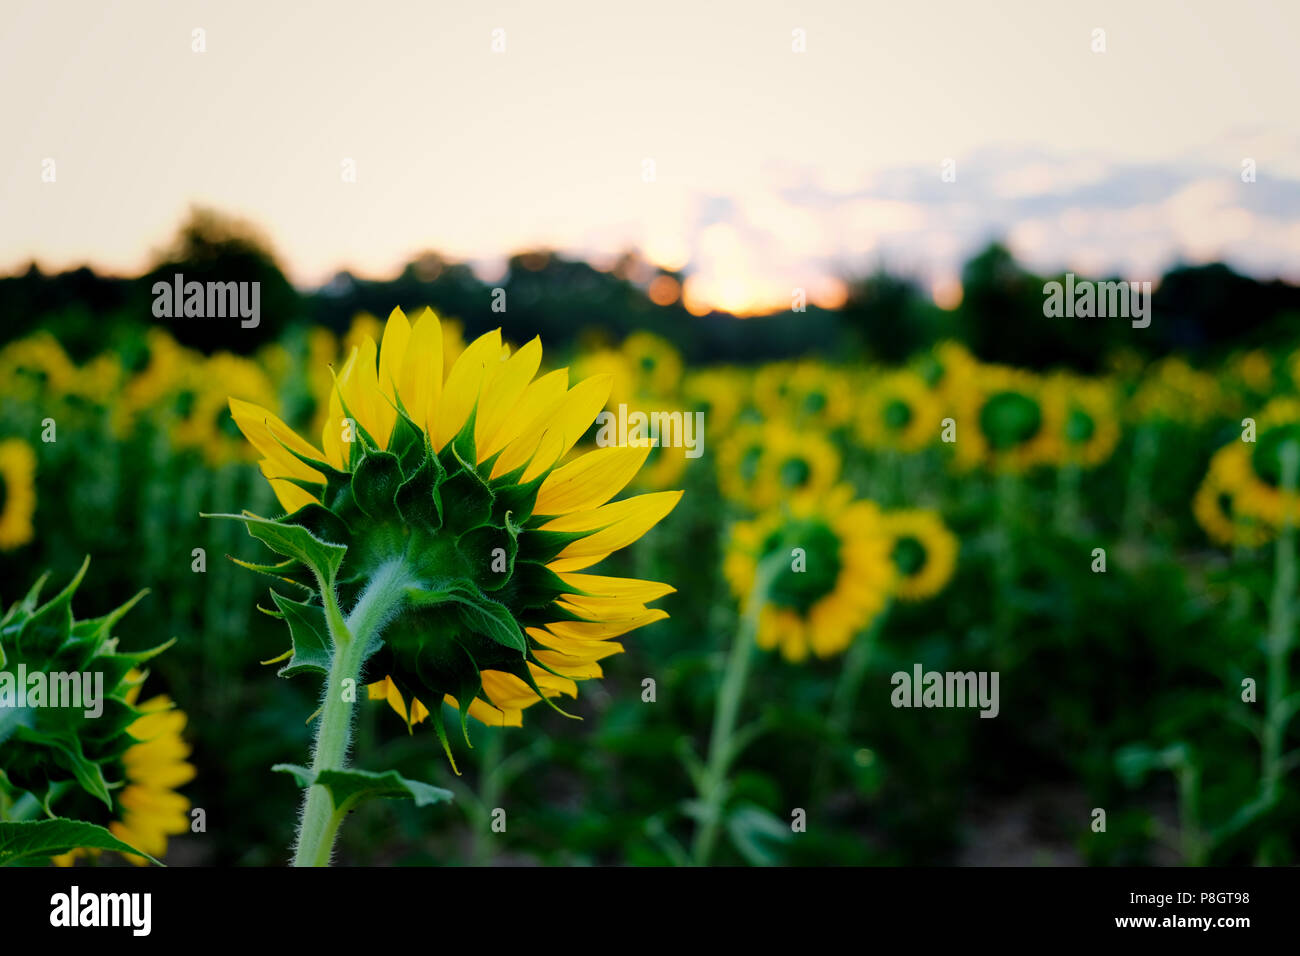 Focus of a back side view of a single sunflower in a field of others which are all facing the rising sun at Dorothea Dix Park in Raleigh North Carolin Stock Photo